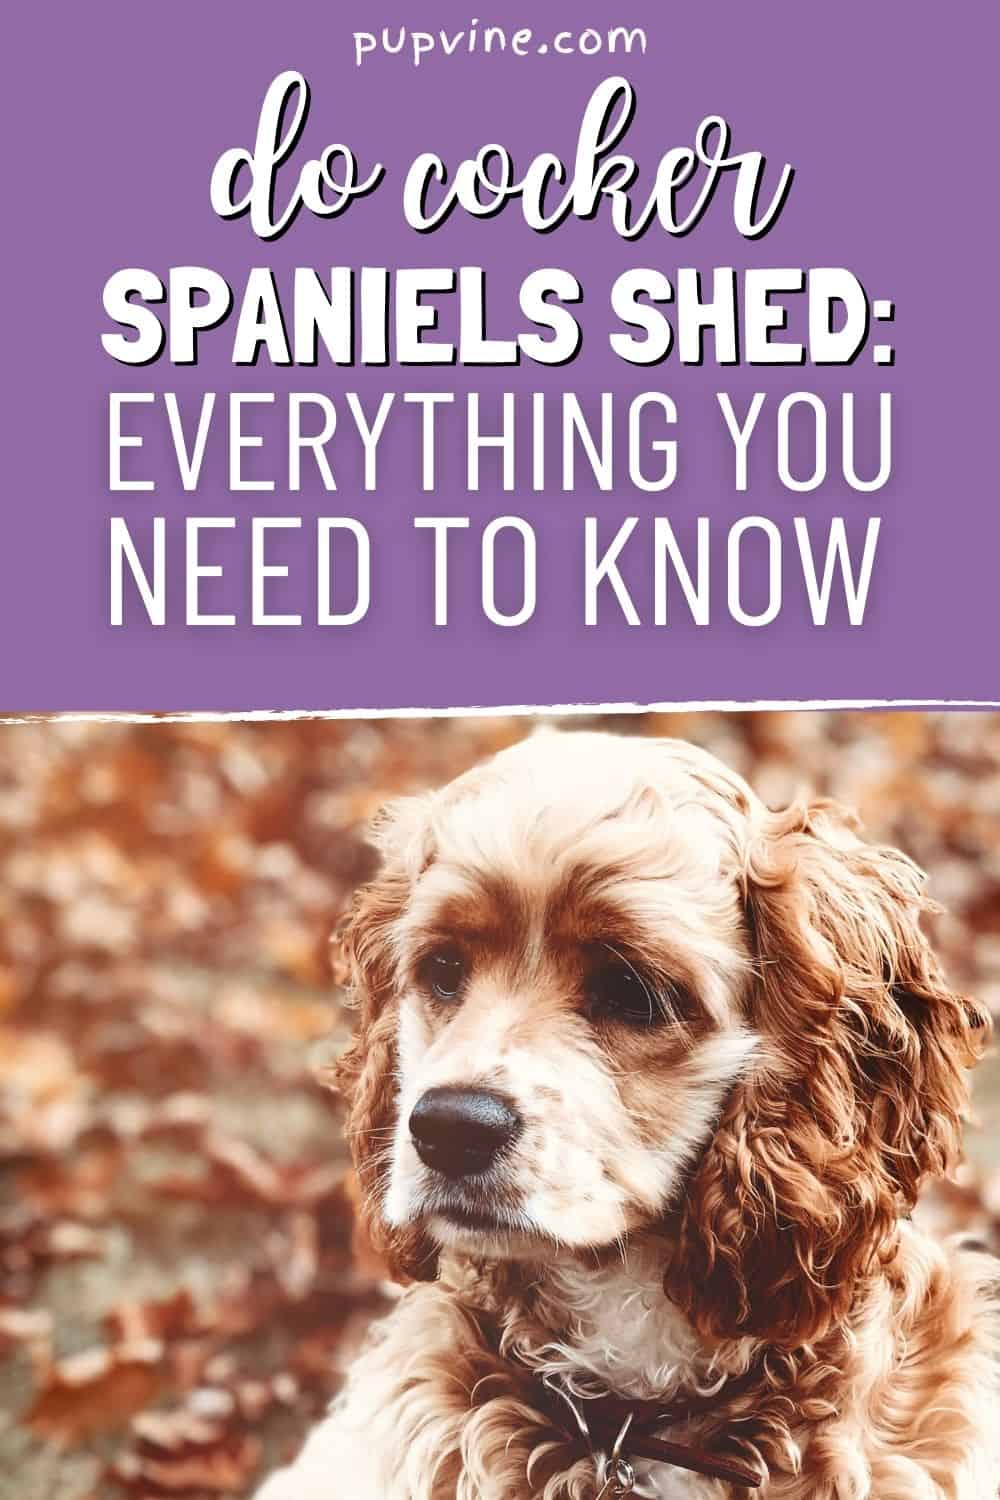 Do Cocker Spaniels Shed: Everything You Need to Know